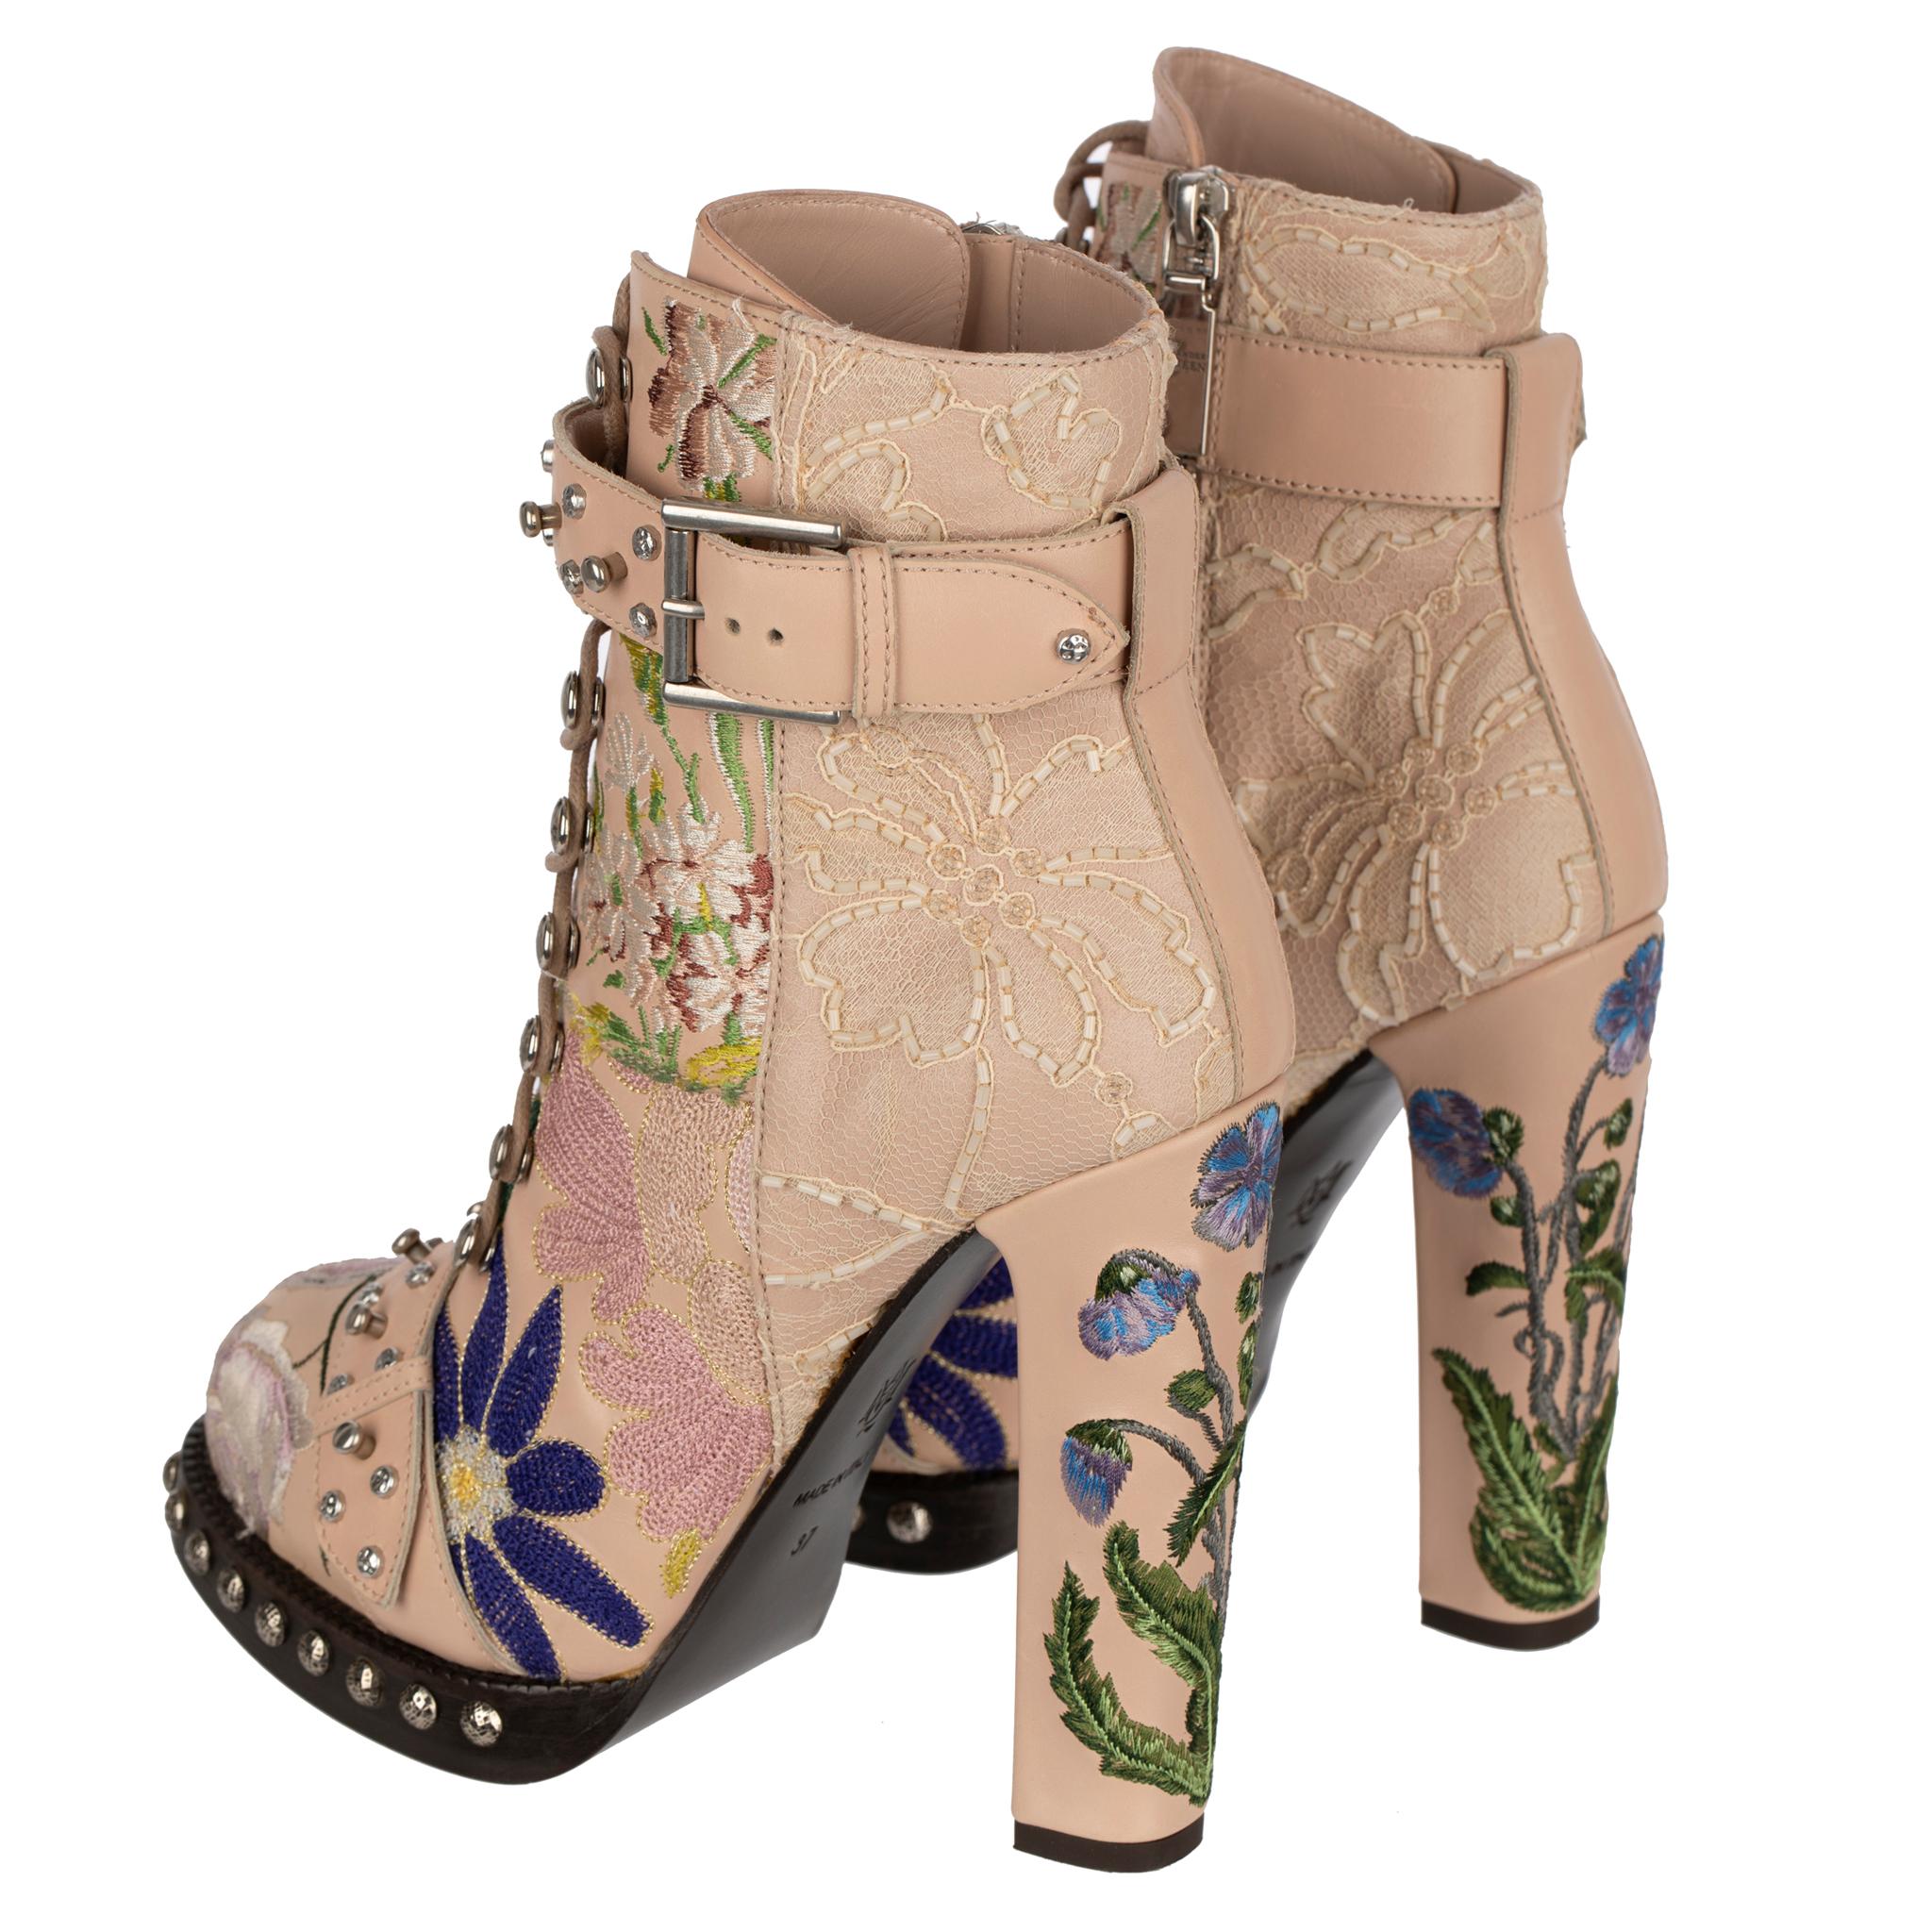 Alexander McQueen Lace-Up Boots With Embroidery 37 FR For Sale 3